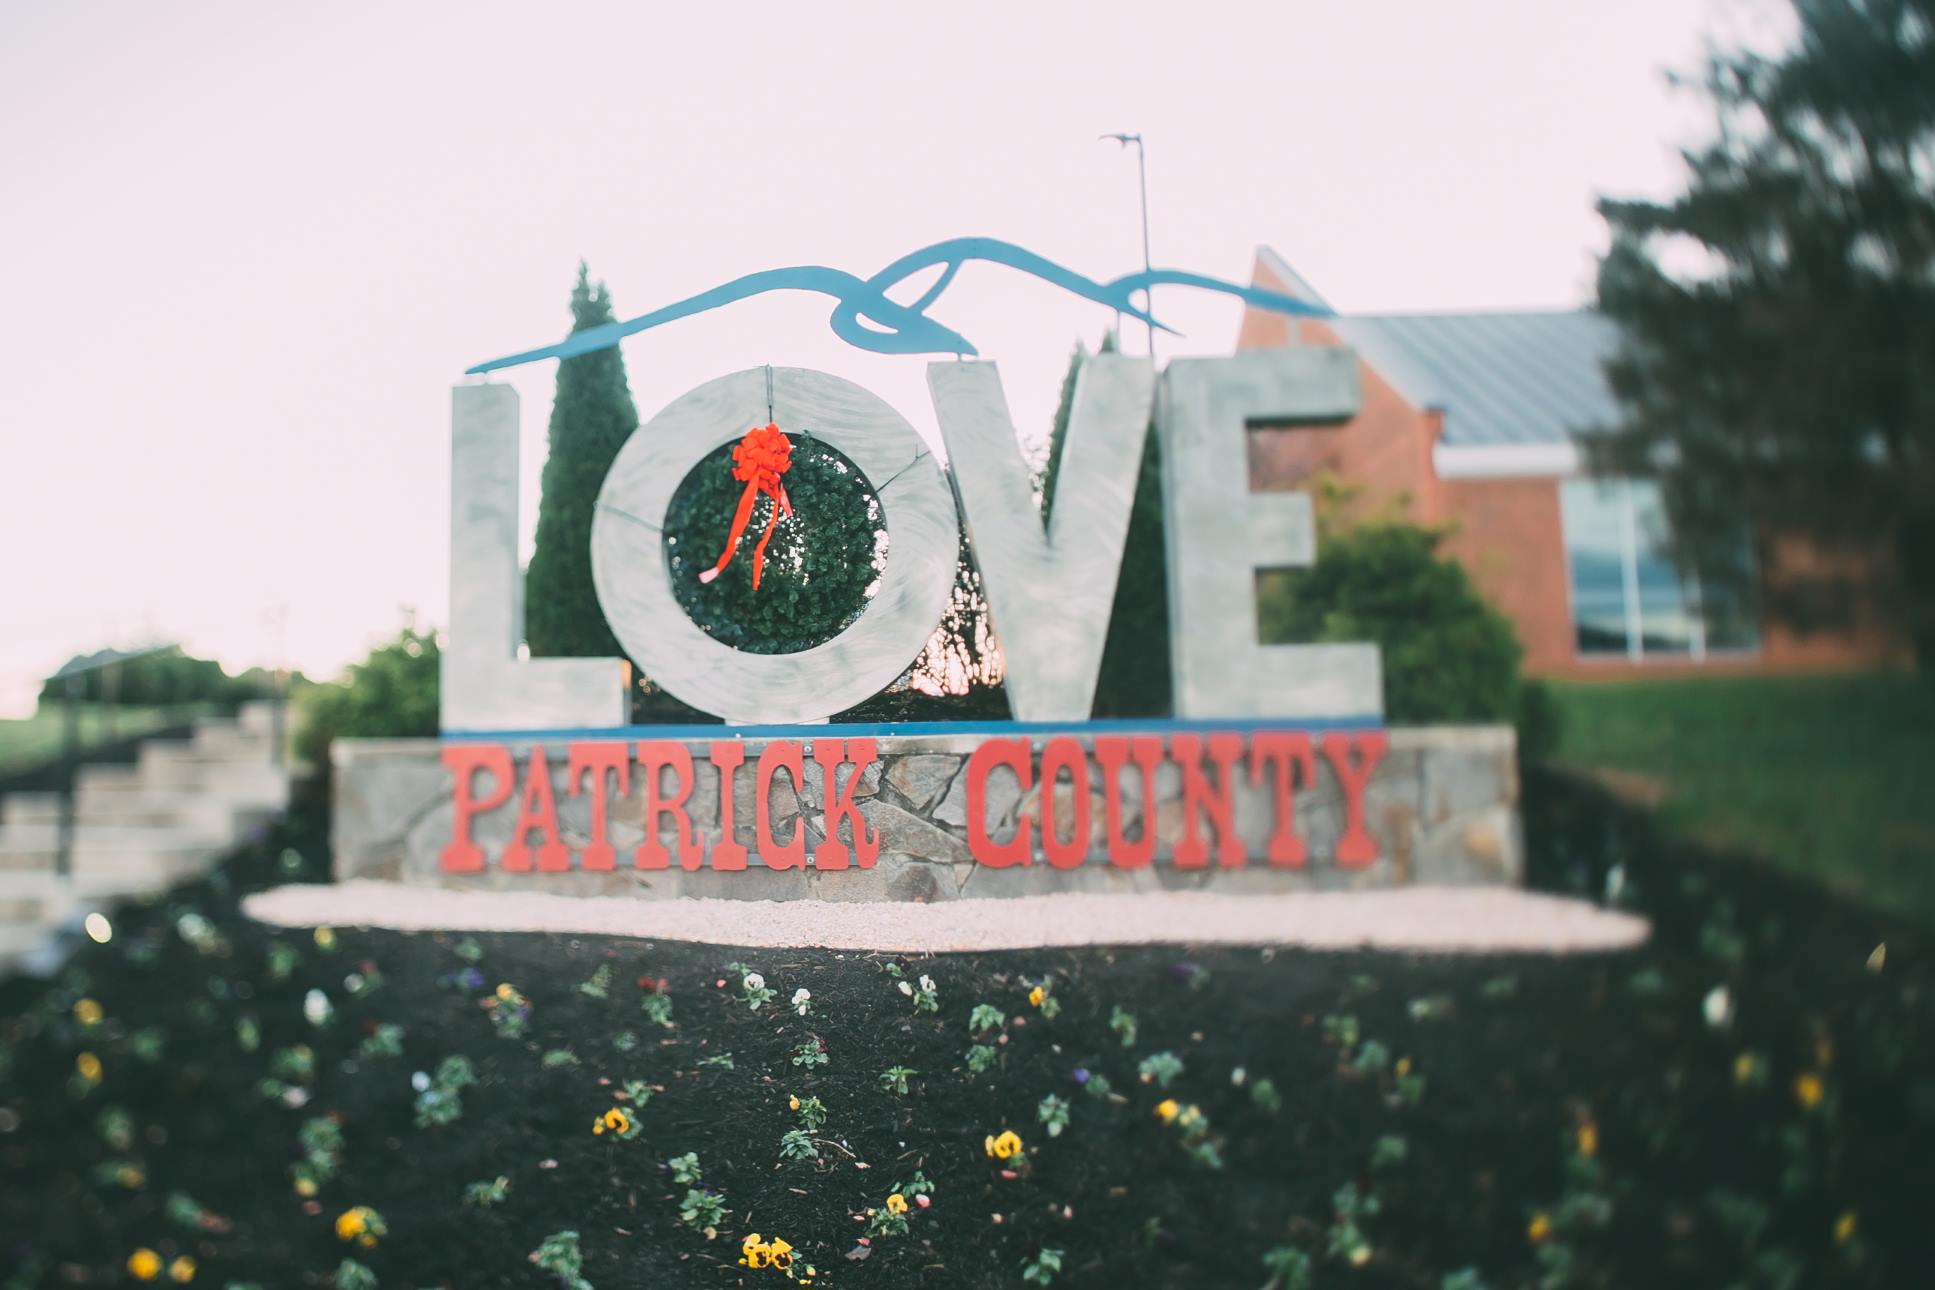 Patrick County LOVE sign with Christmas wreath